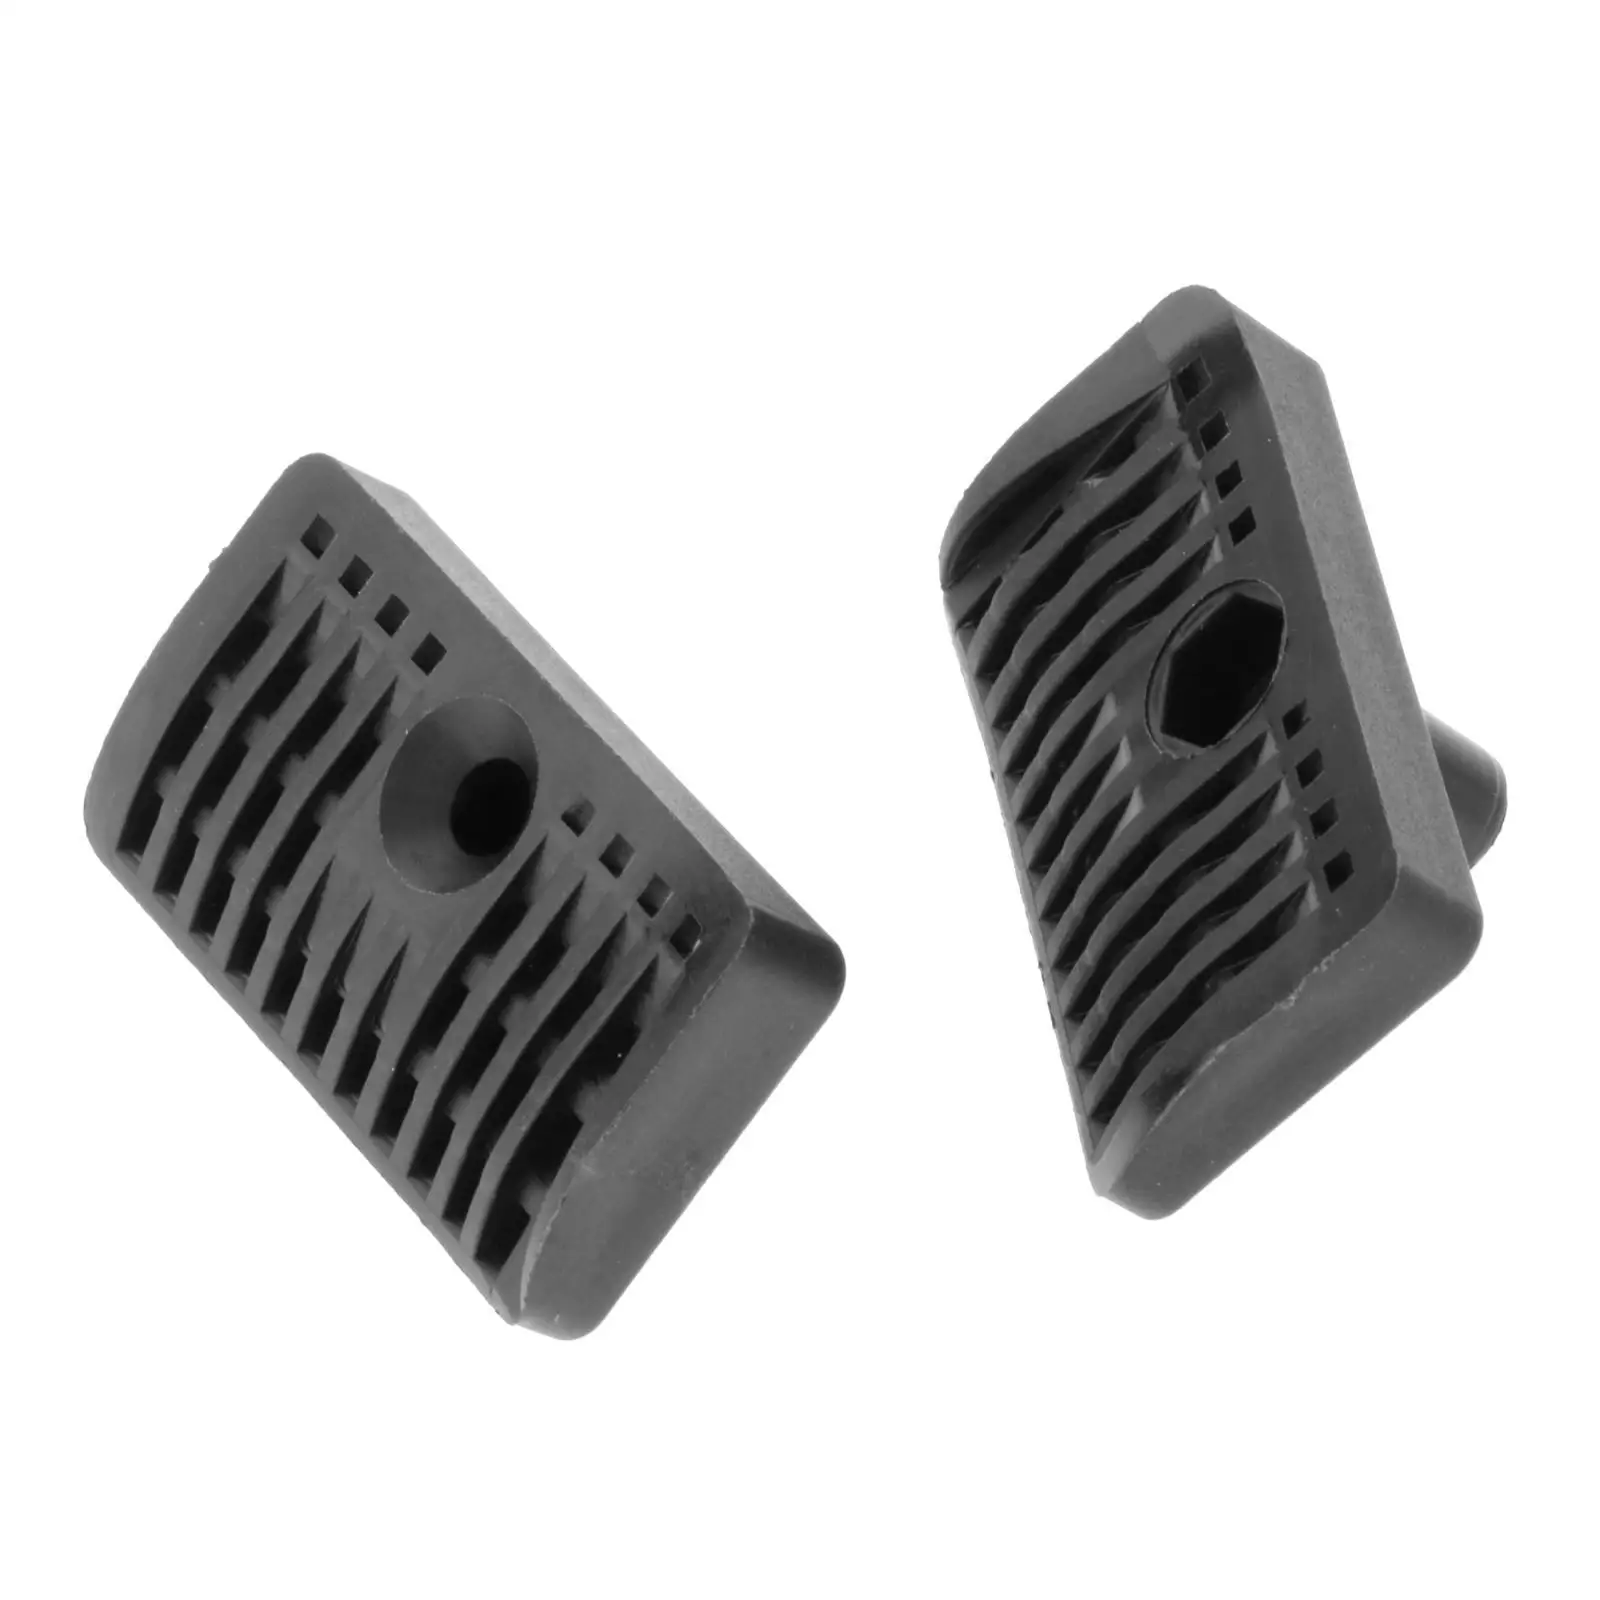 Water Inlet Covers Plastic Fits for  6214-00 Easy to Install